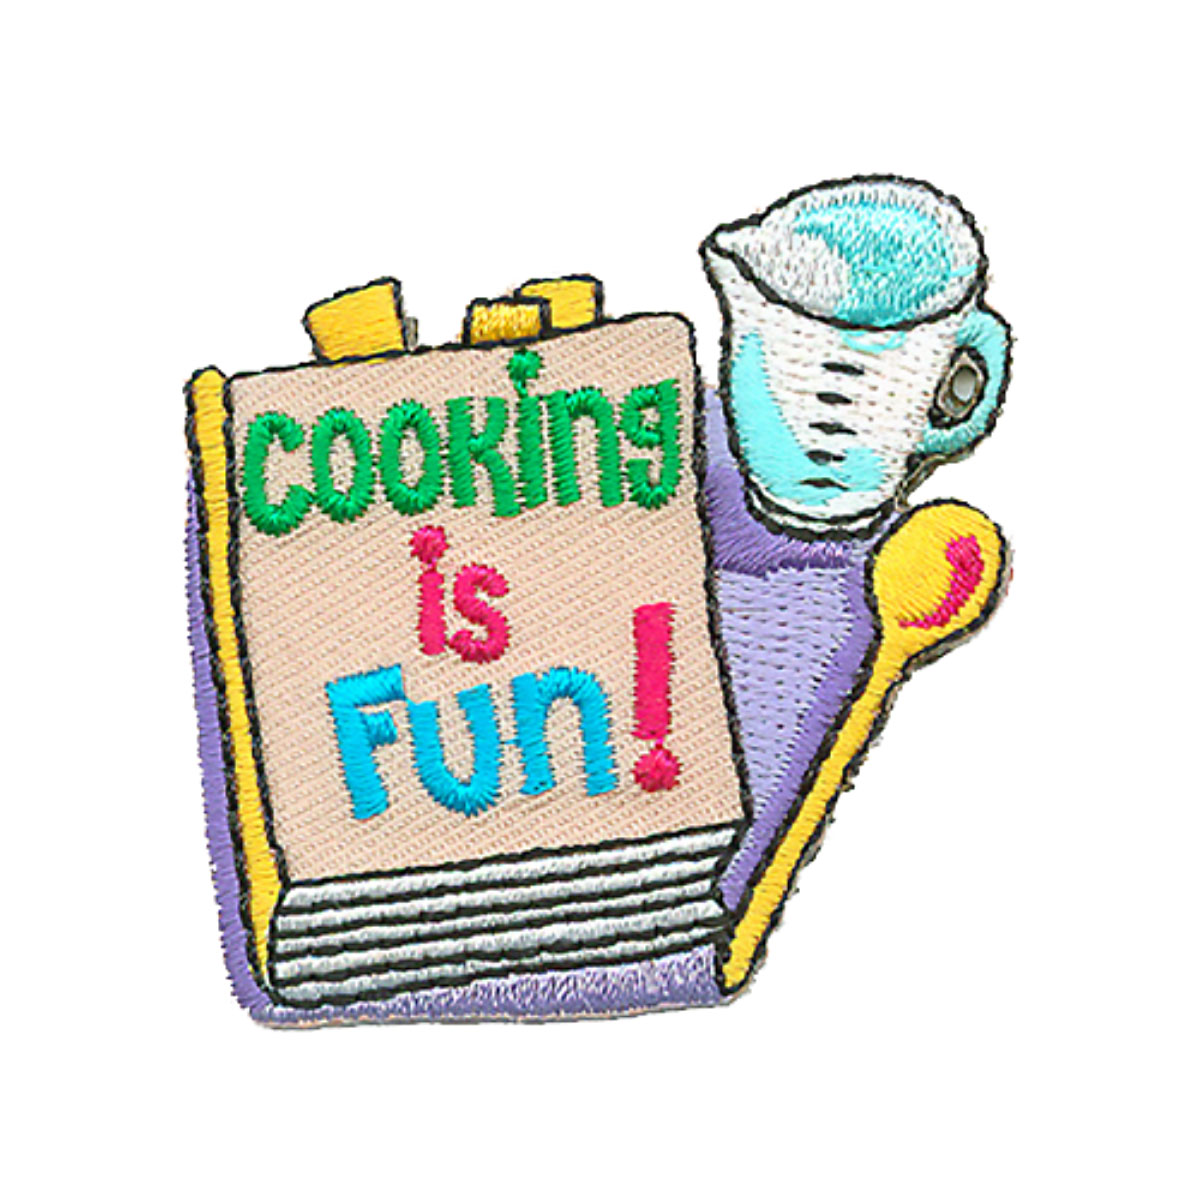 Cooking is Fun - W